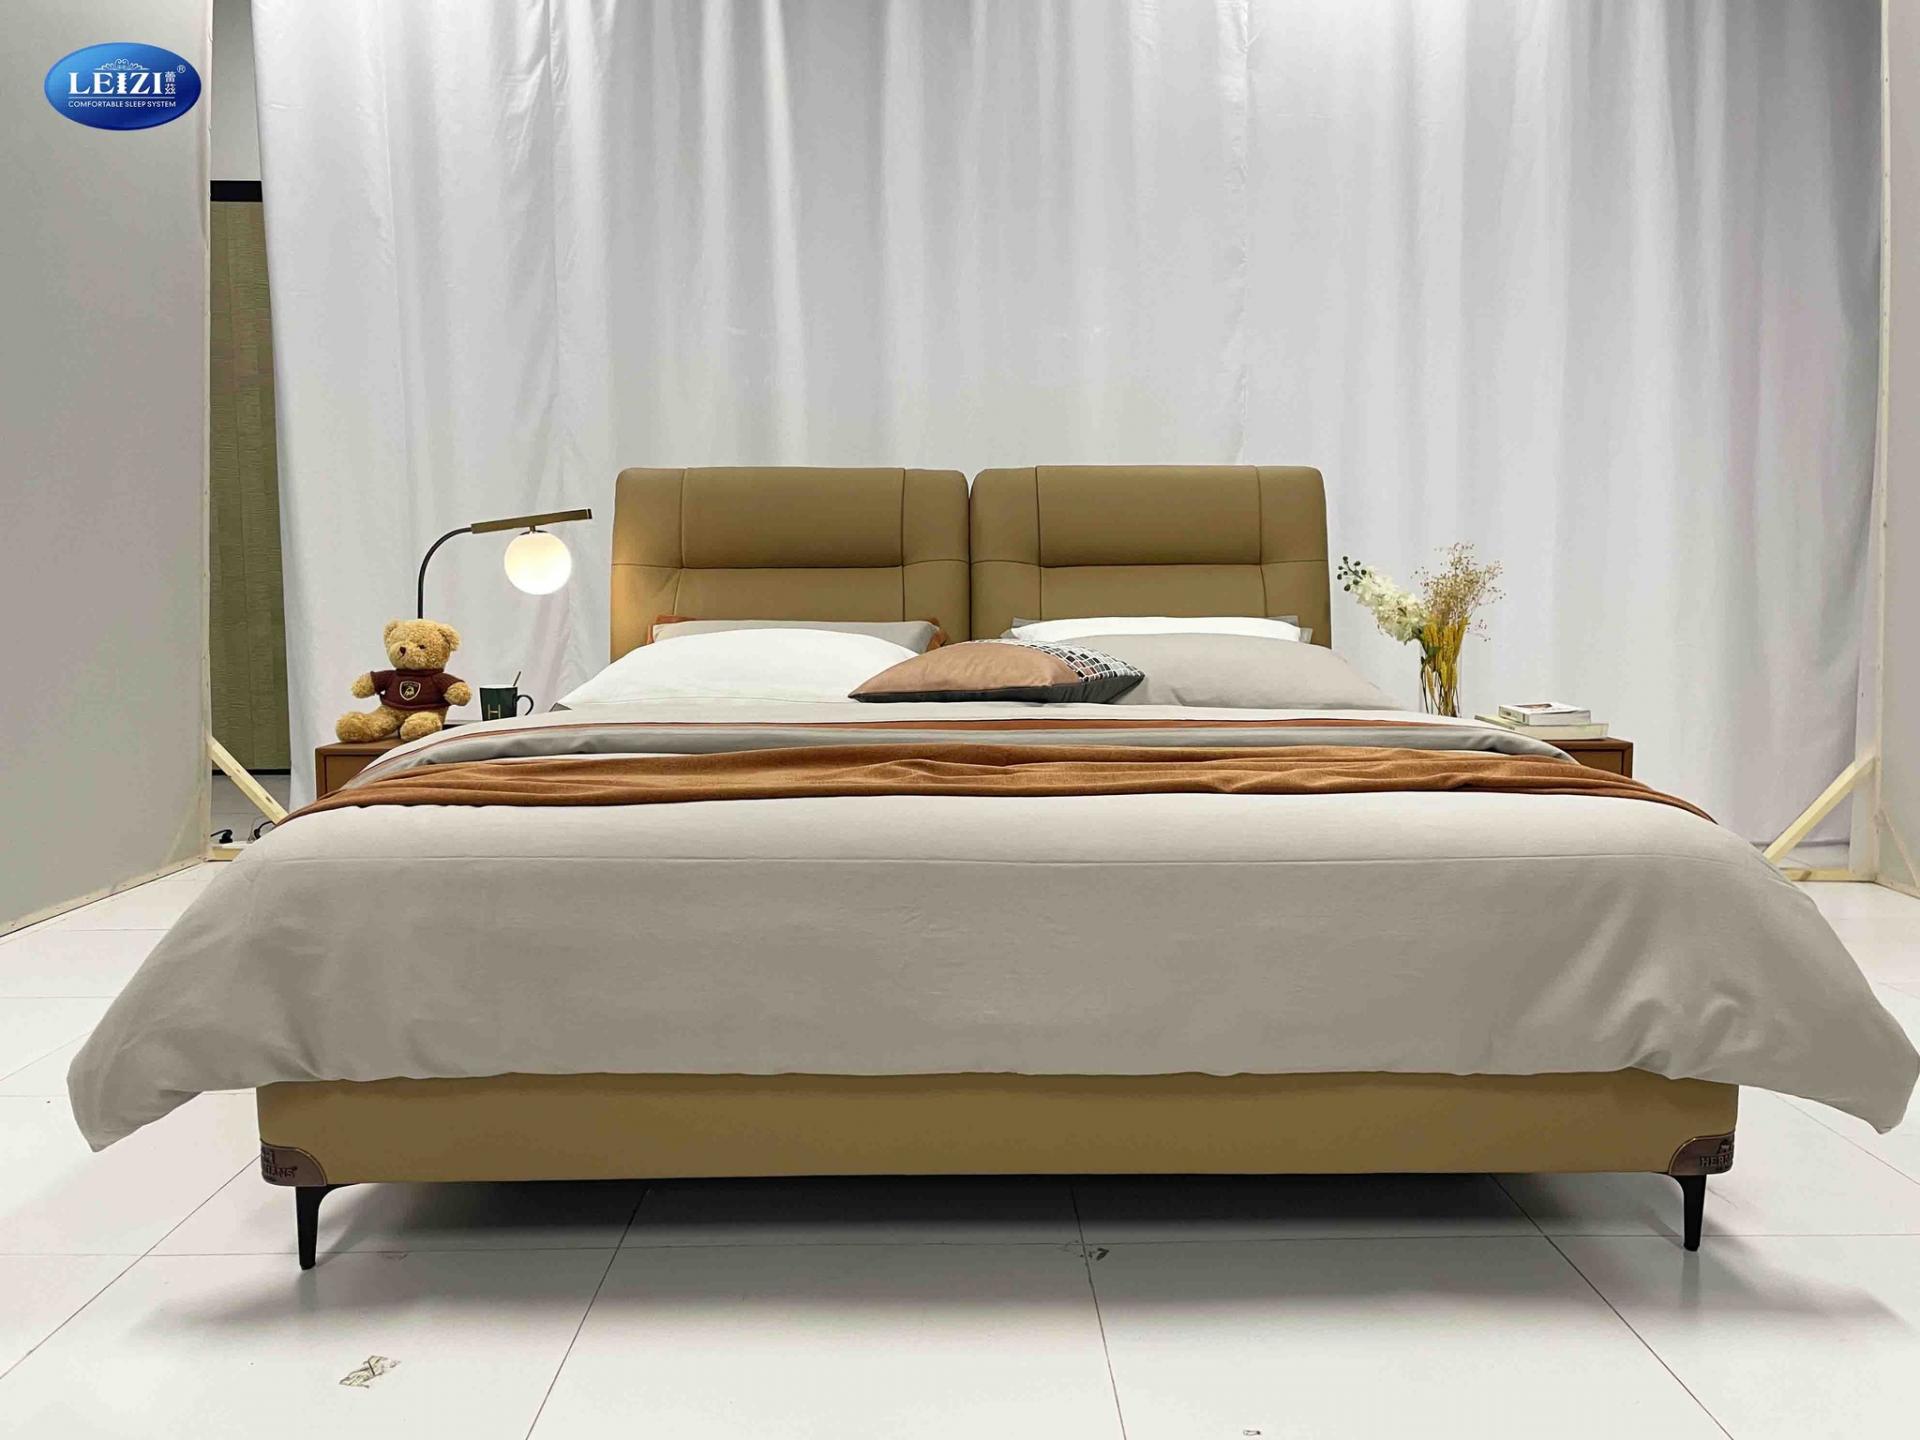 What Is An Upholstered Bed? Upholstered Bed VS Wooden Bed VS Metal Bed